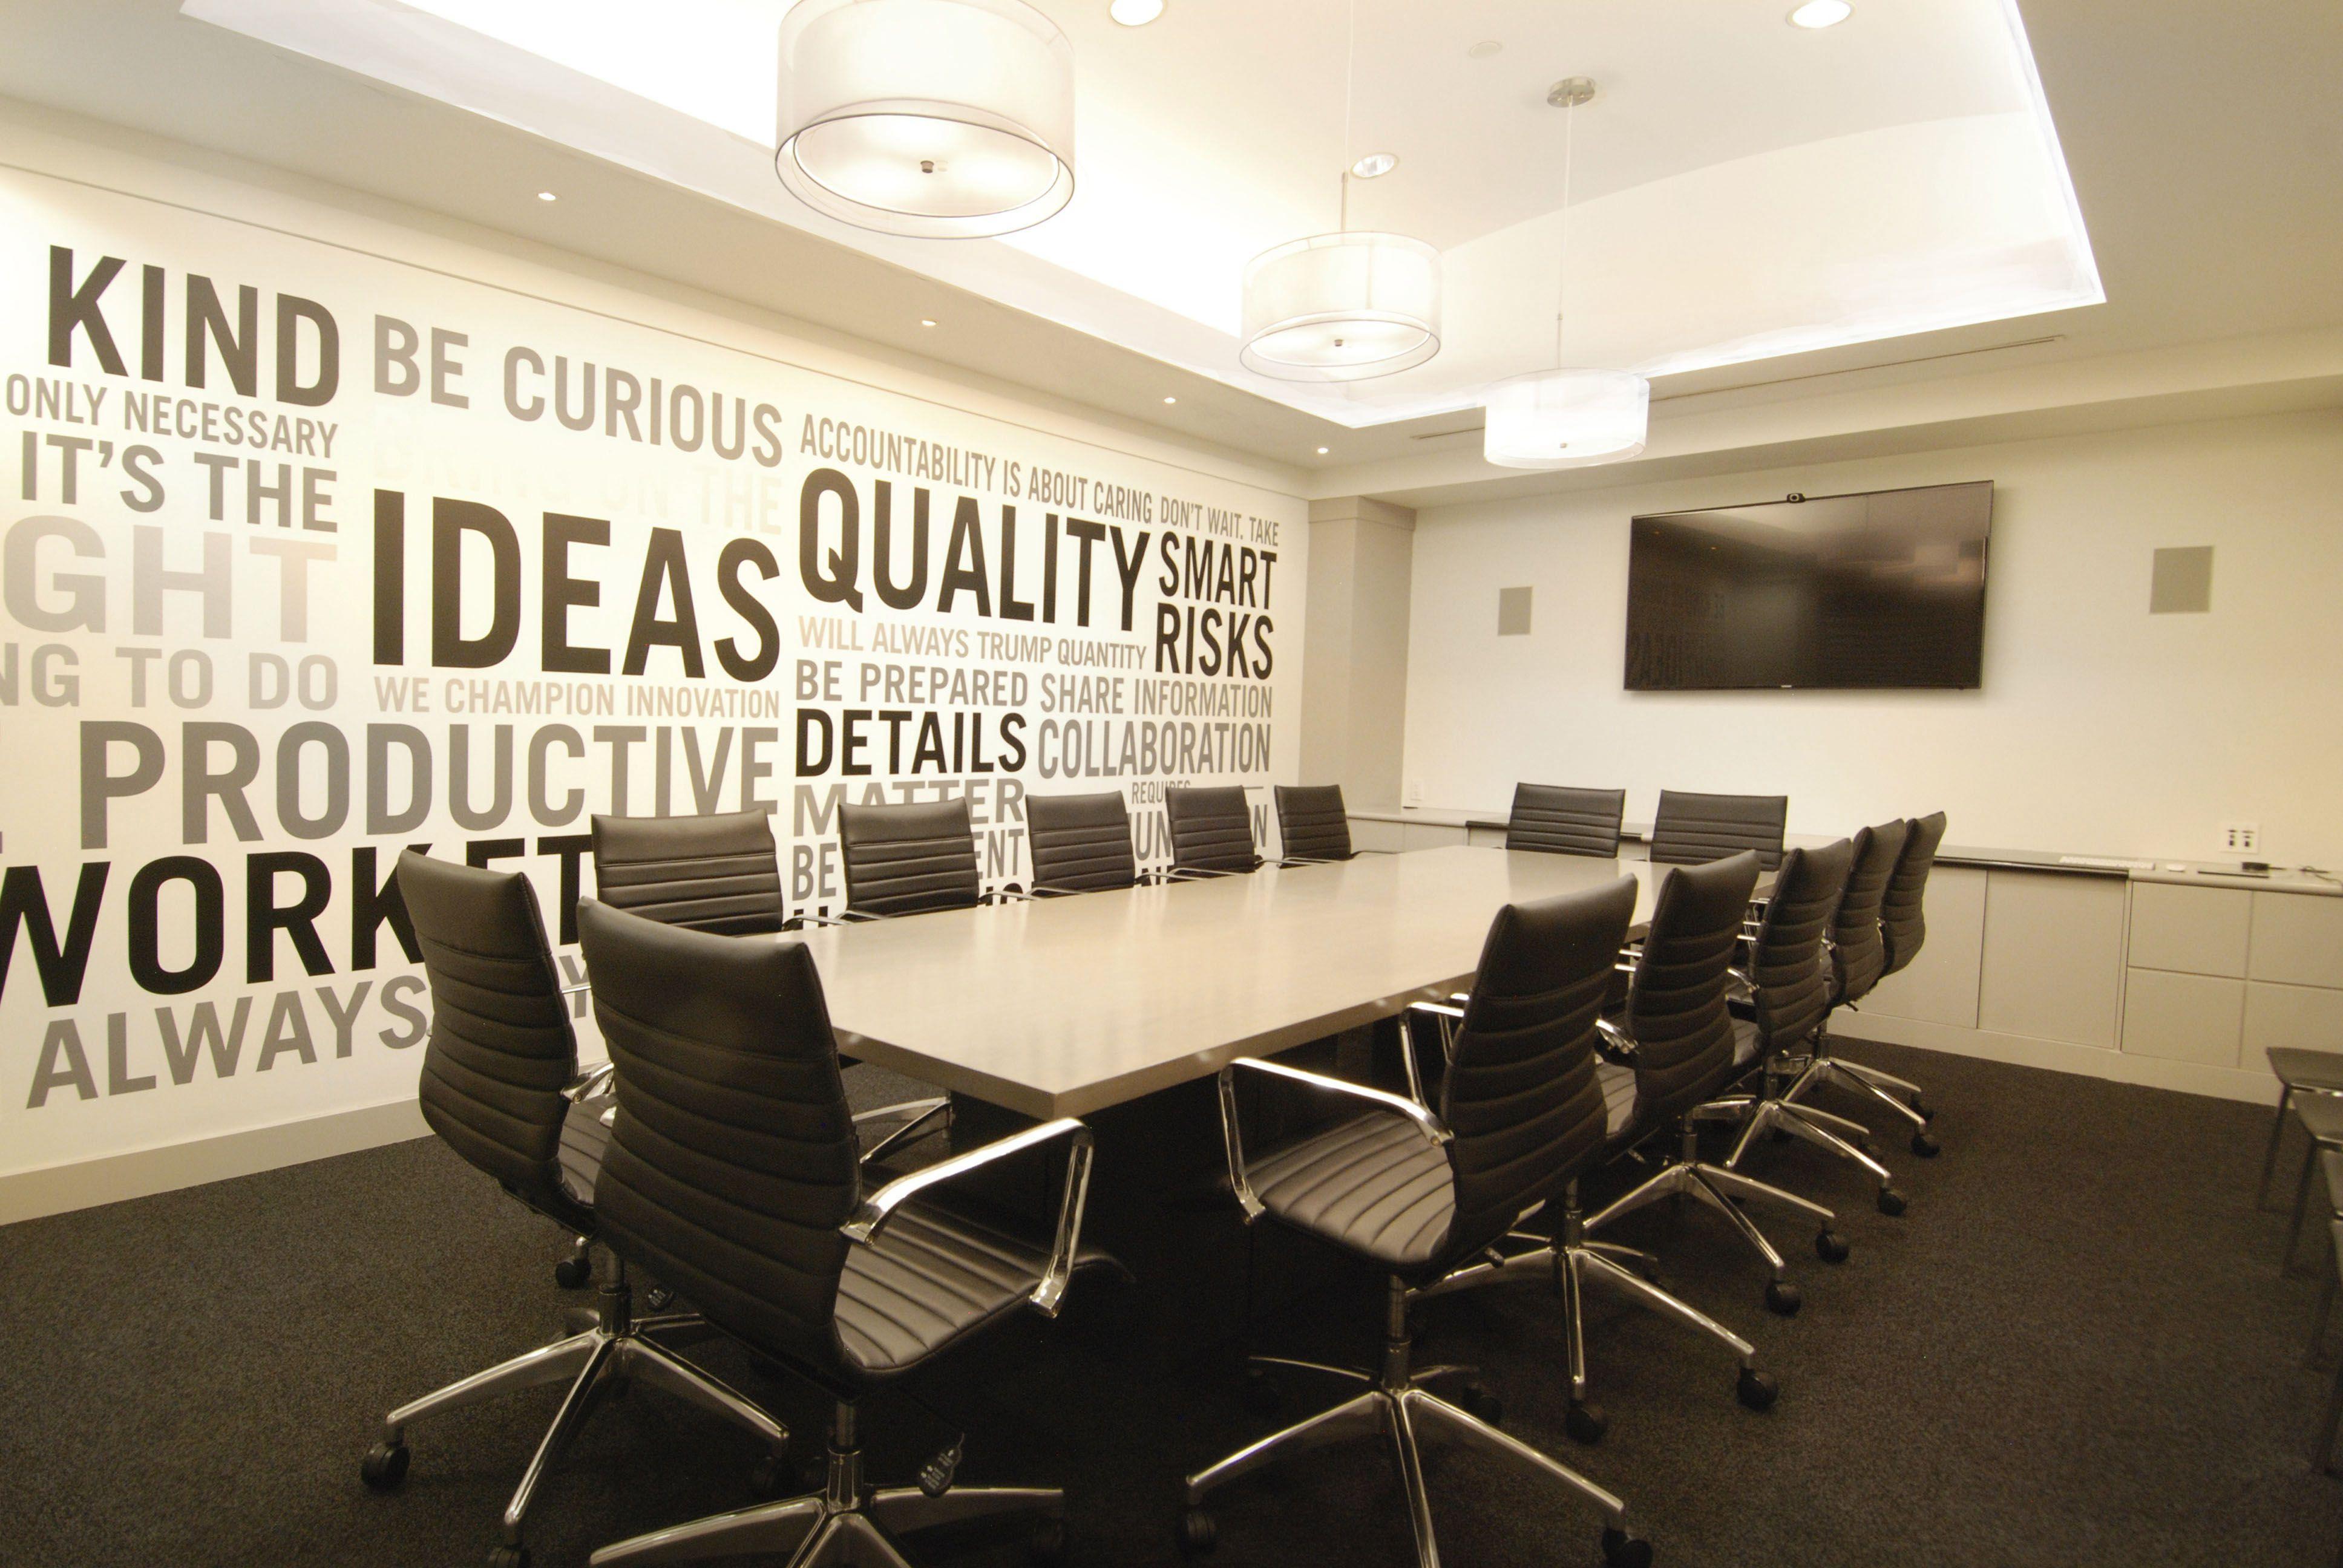 Conference room design ideas. Office spaces